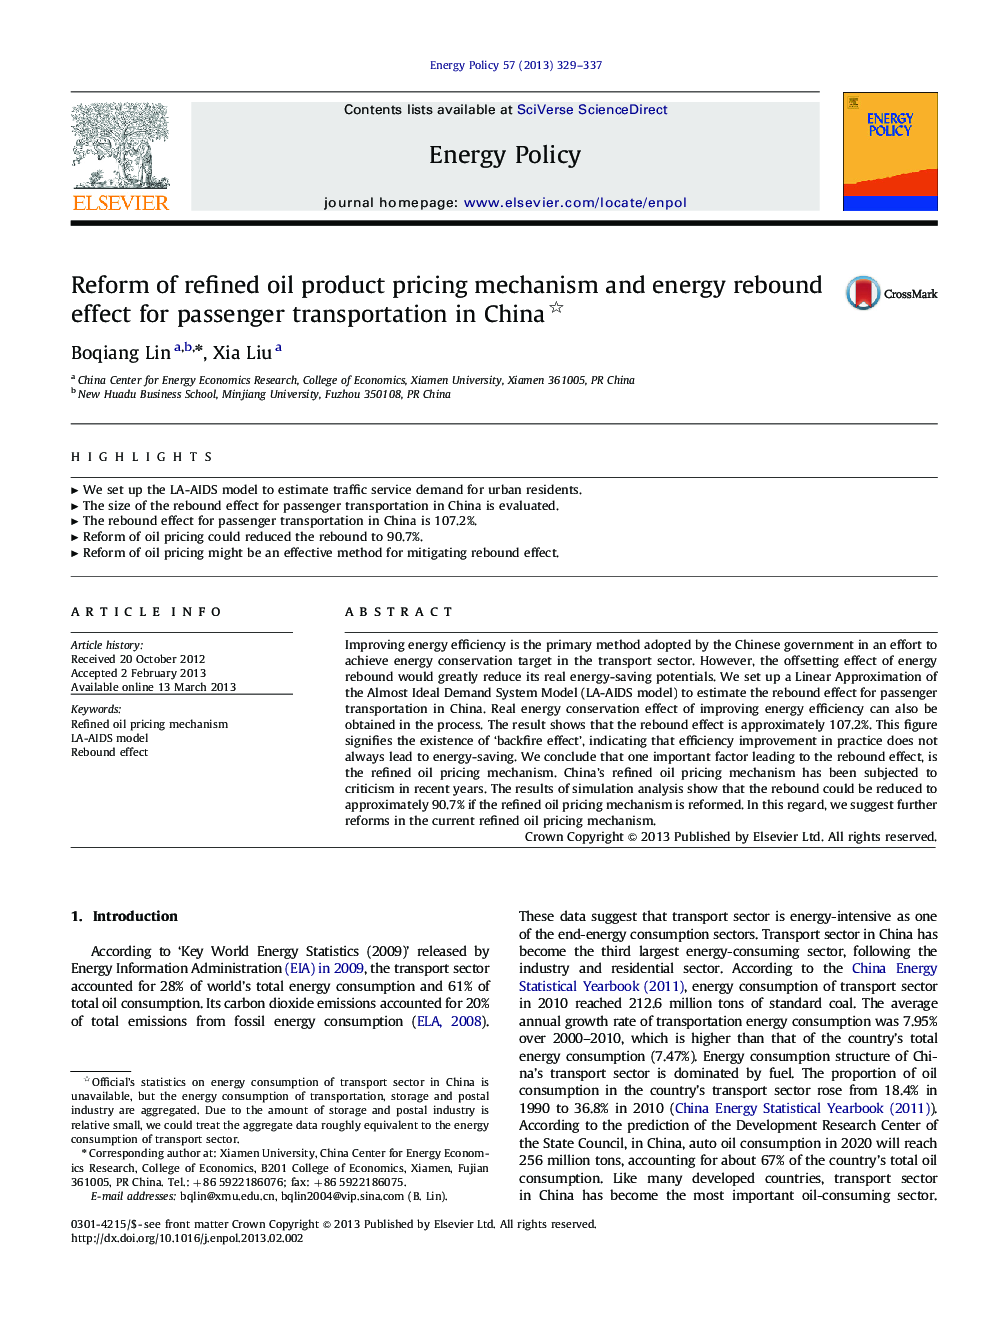 Reform of refined oil product pricing mechanism and energy rebound effect for passenger transportation in China 